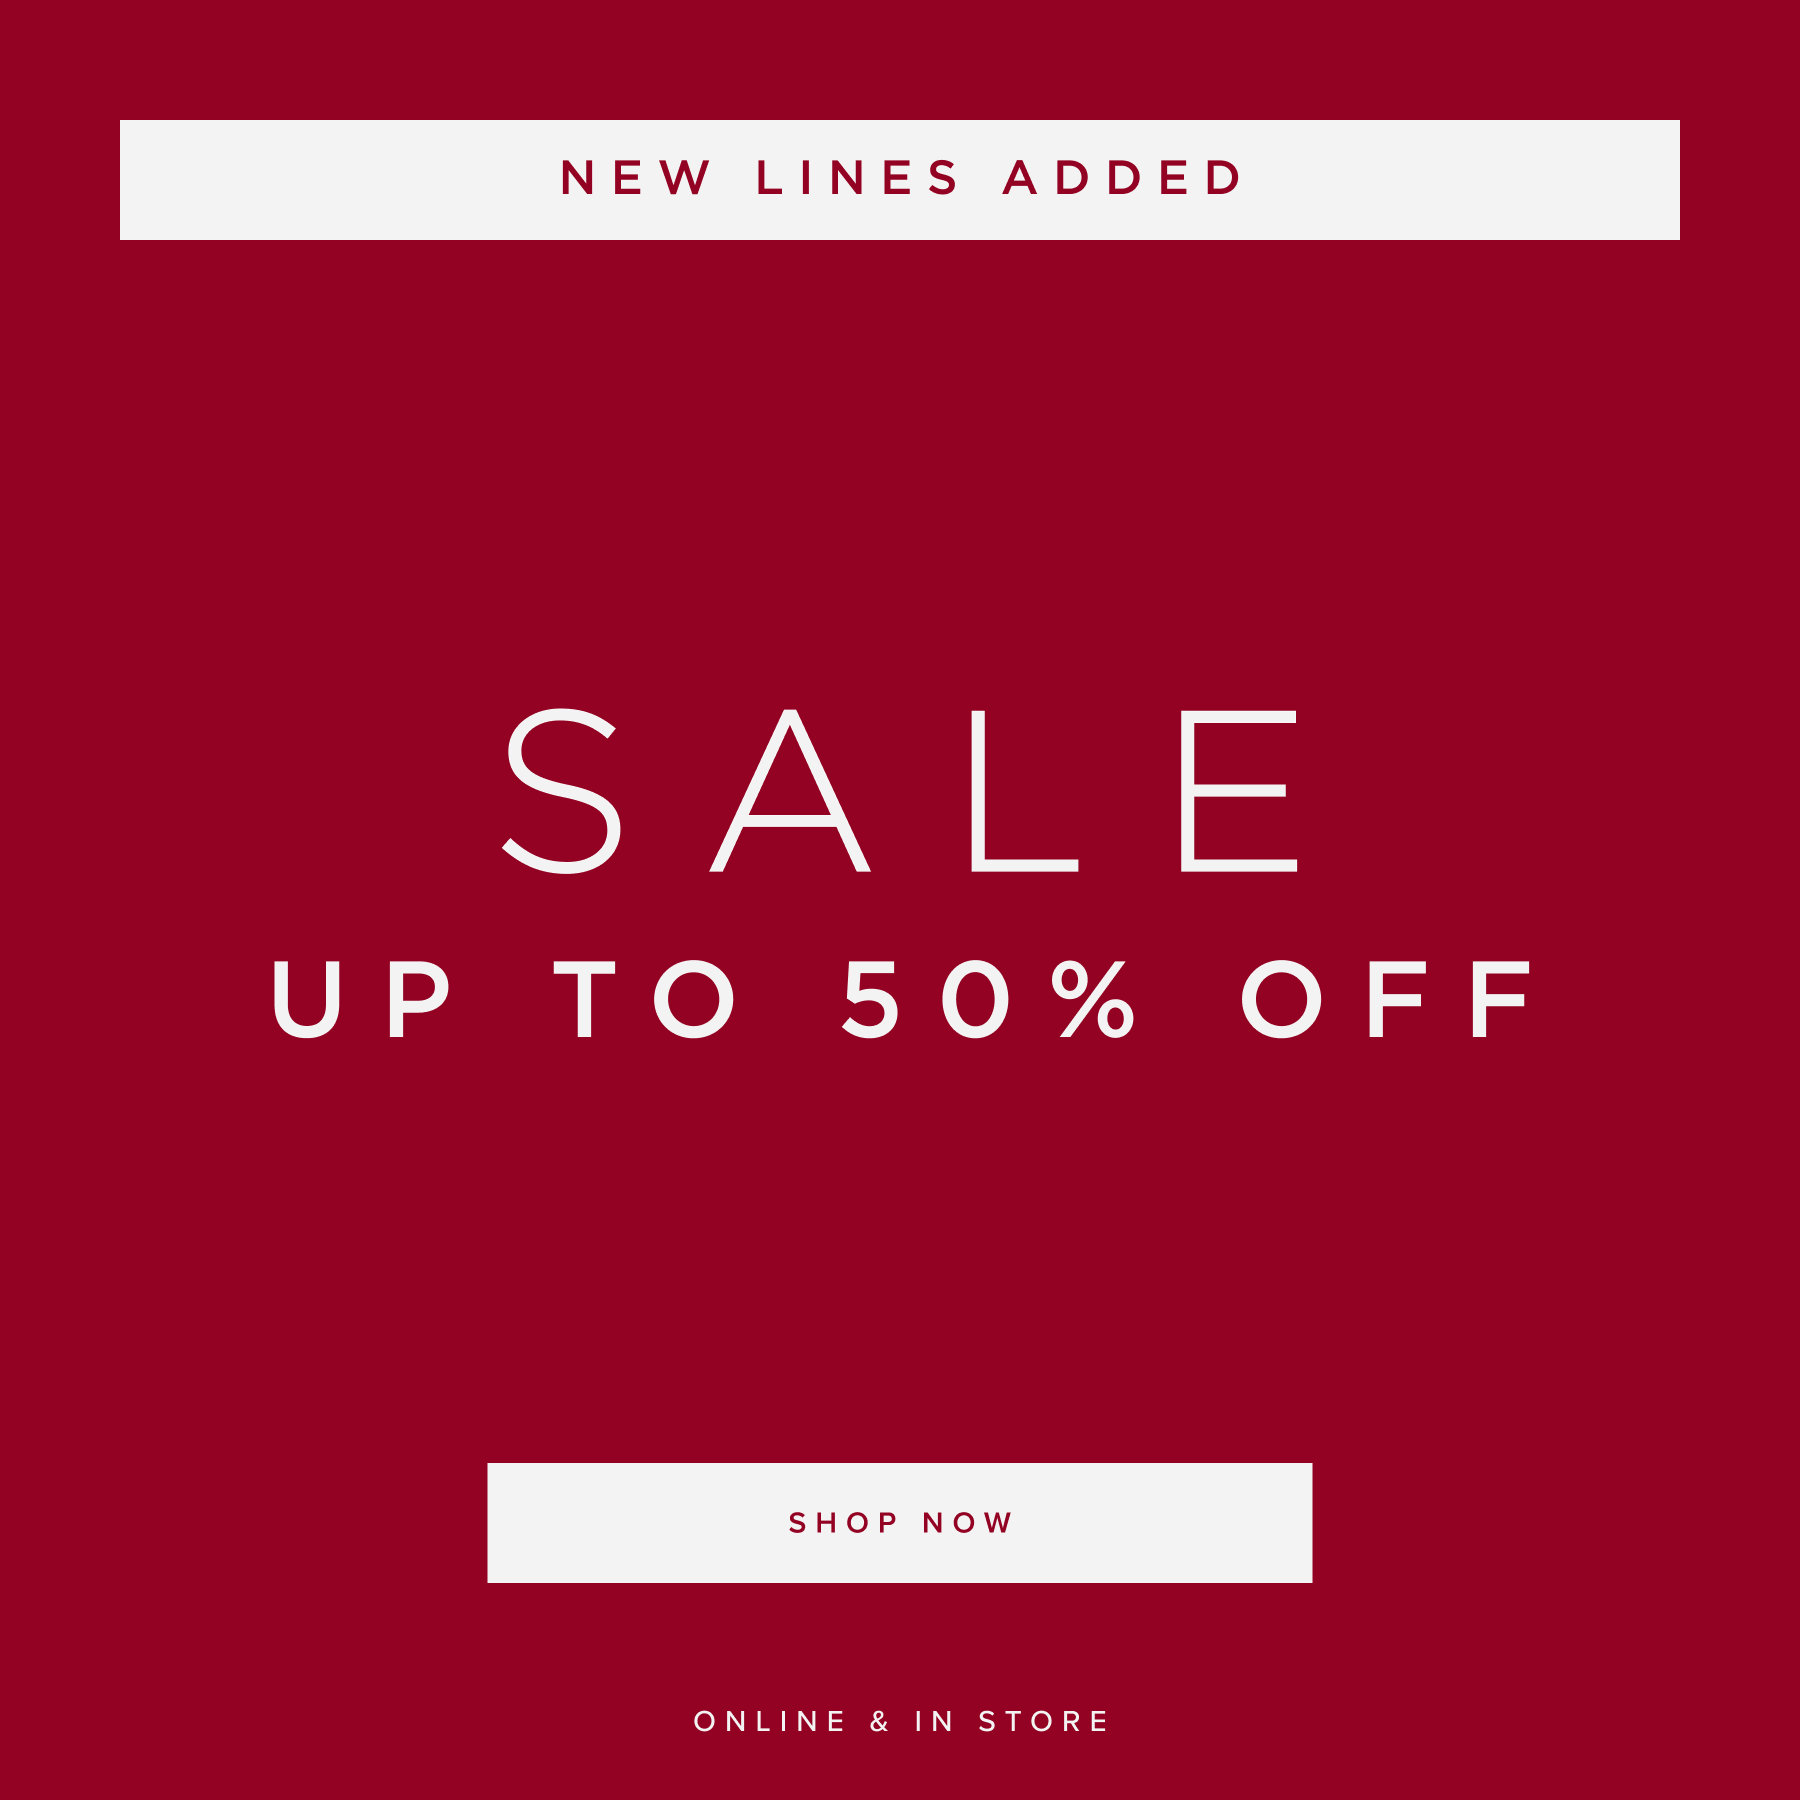 Sale Up to 50% off - New lines added